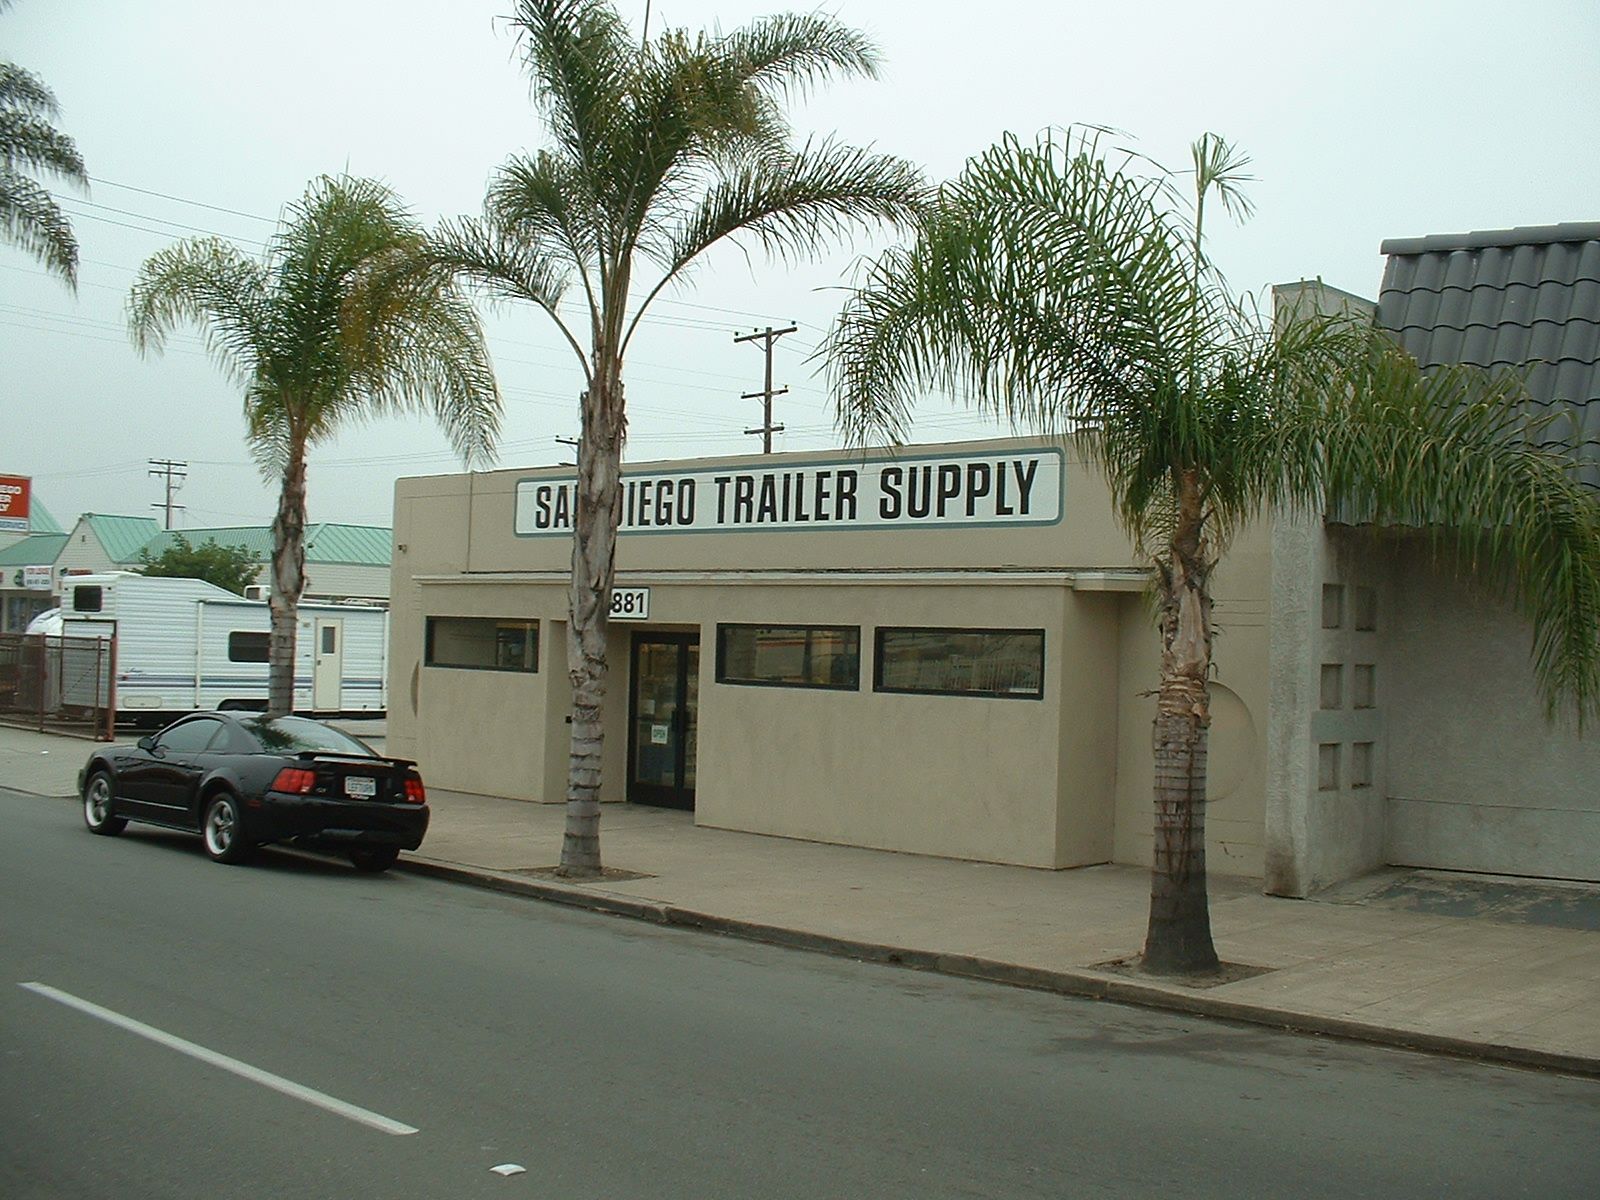 Services & Products San Diego Trailer Supply in San Diego CA